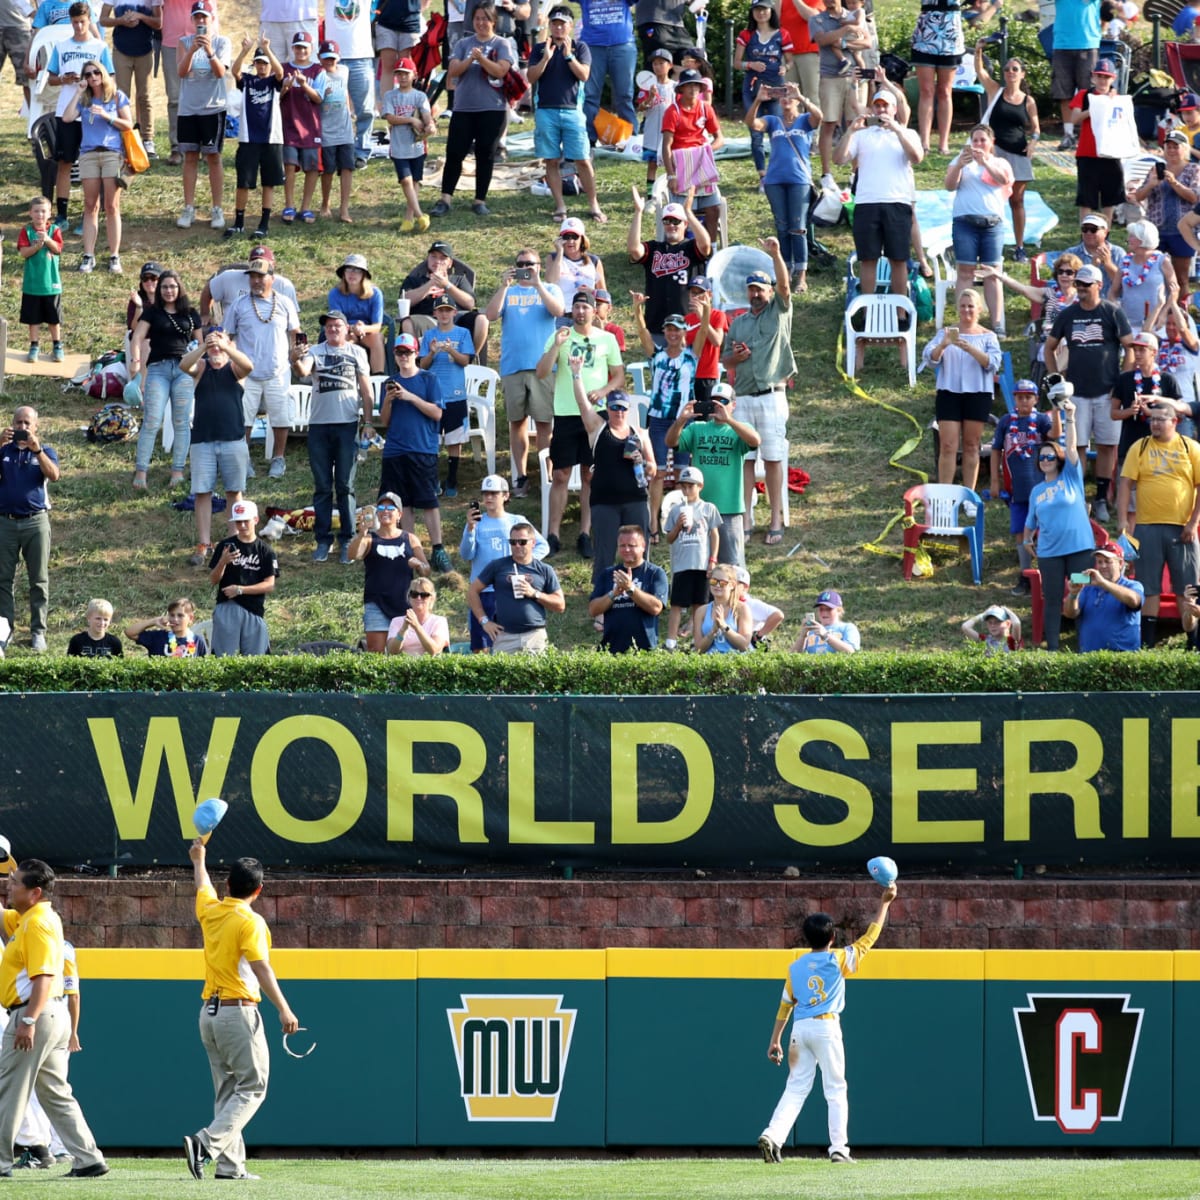 Little League World Series clouded by big money, cheating speculation